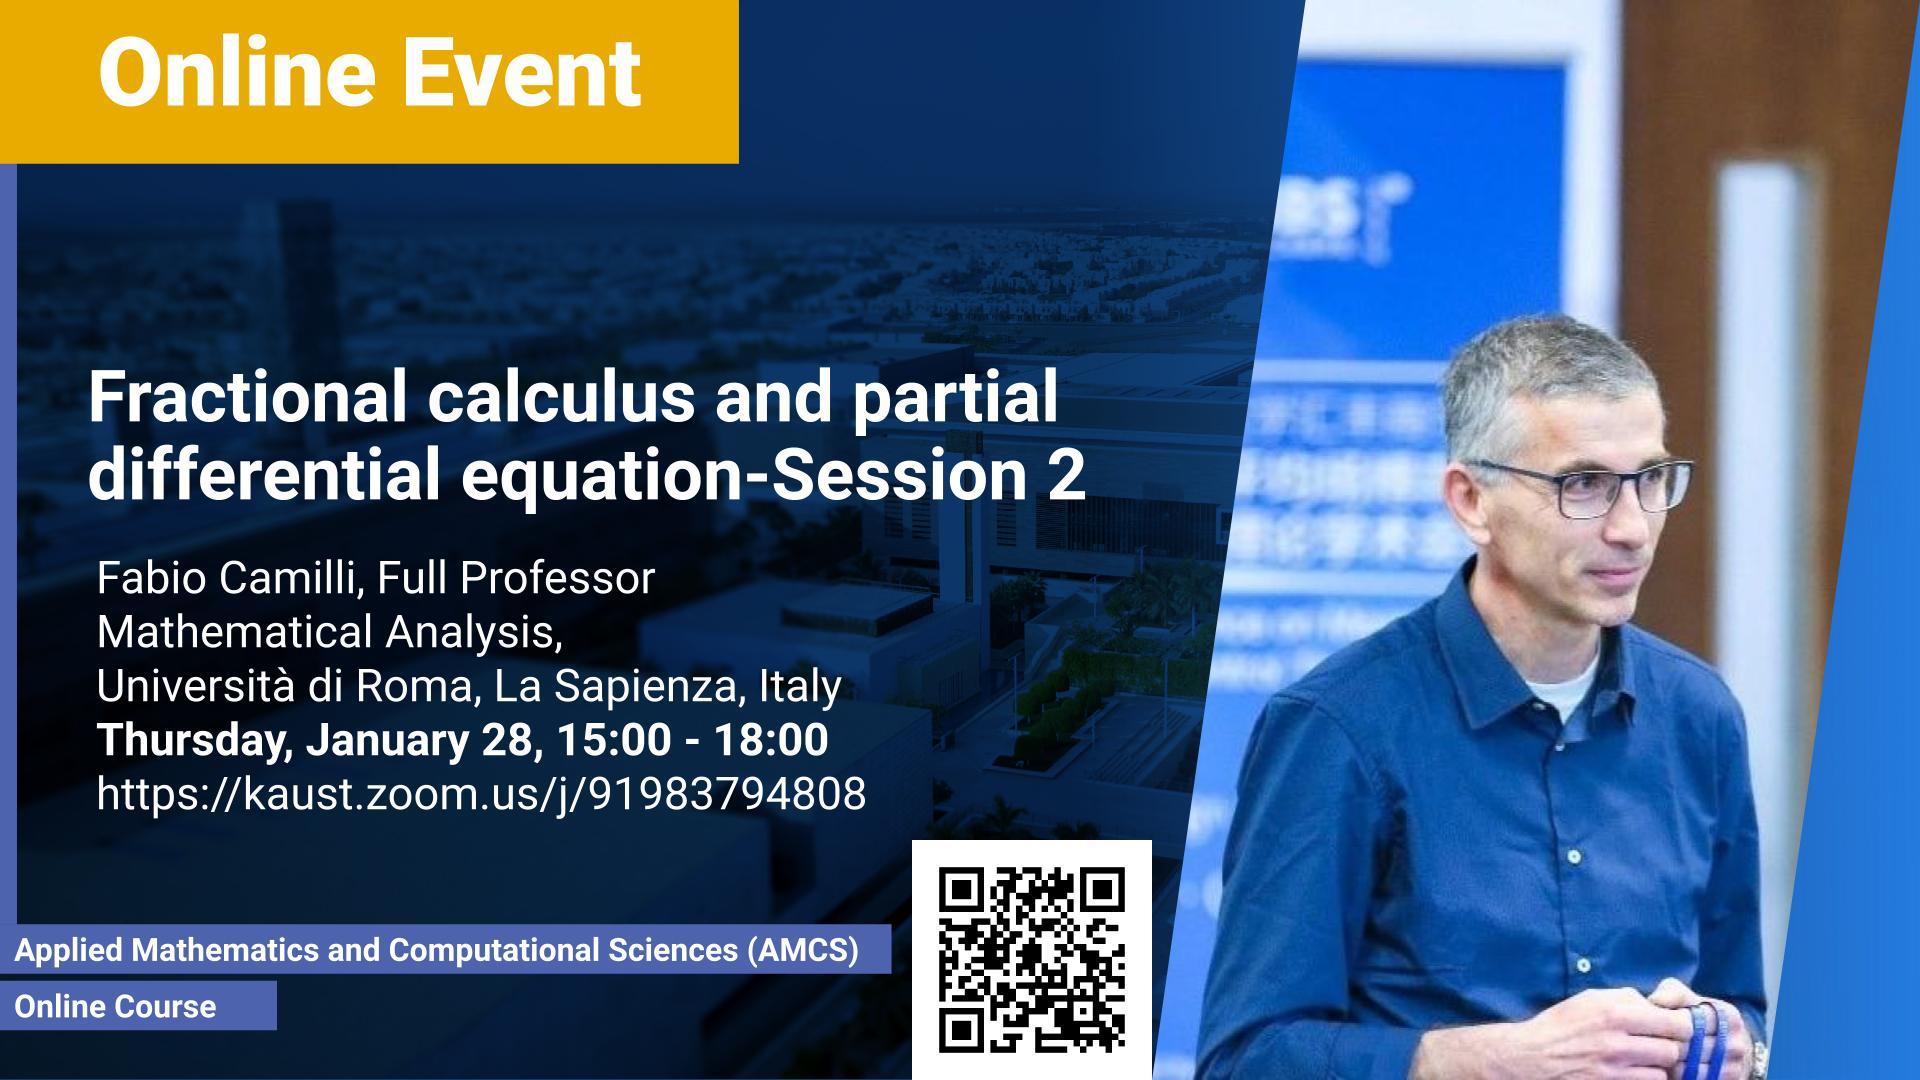 KAUST CEMSE AMCS Online Course Fabio Camilli Fractional calculus and partial differential equation Session 2